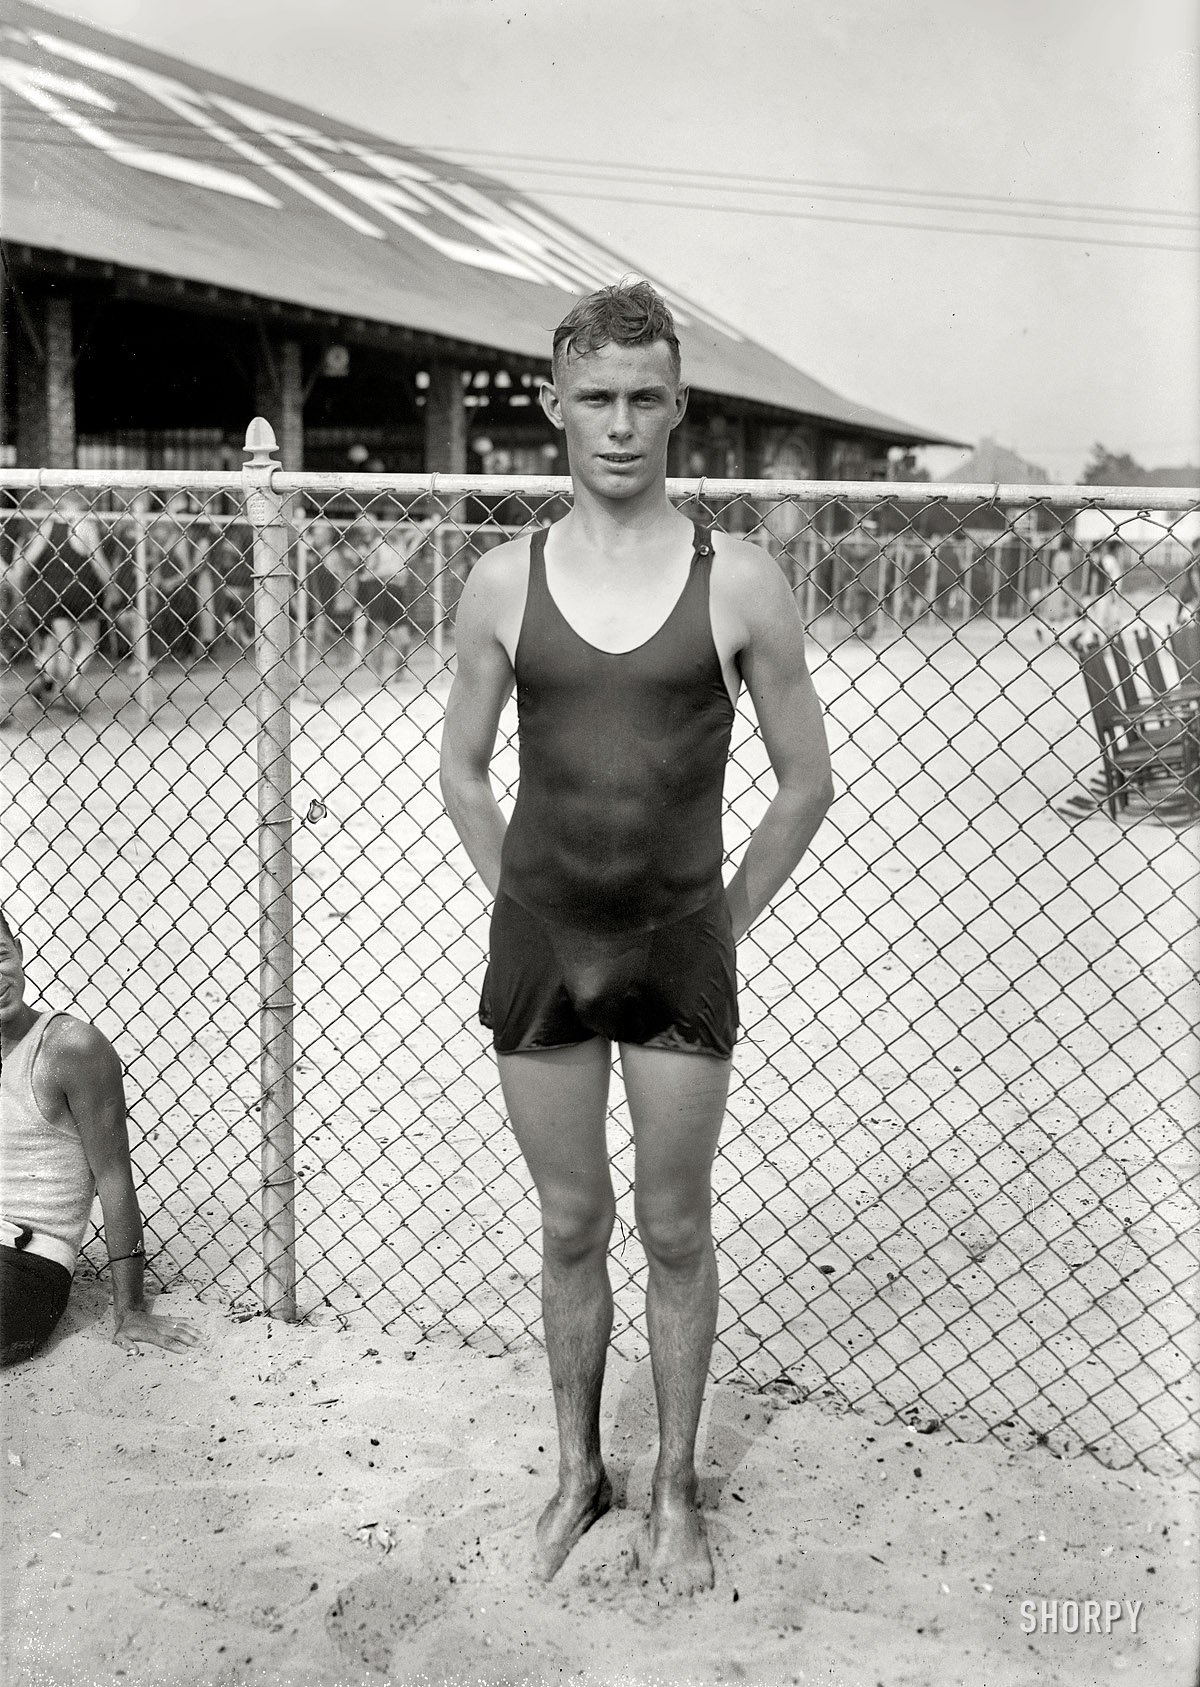 Riverton, New Jersey, July 23, 1921. "Jimmy Hall, Central Y.M.C.A." James W. Hall Jr. of Brooklyn, who won the 1921 National A.A.U. distance title by default after the first-place finisher was disqualified for completing the 10-mile event in the Delaware River without a swimsuit. Bain News Service. View full size.